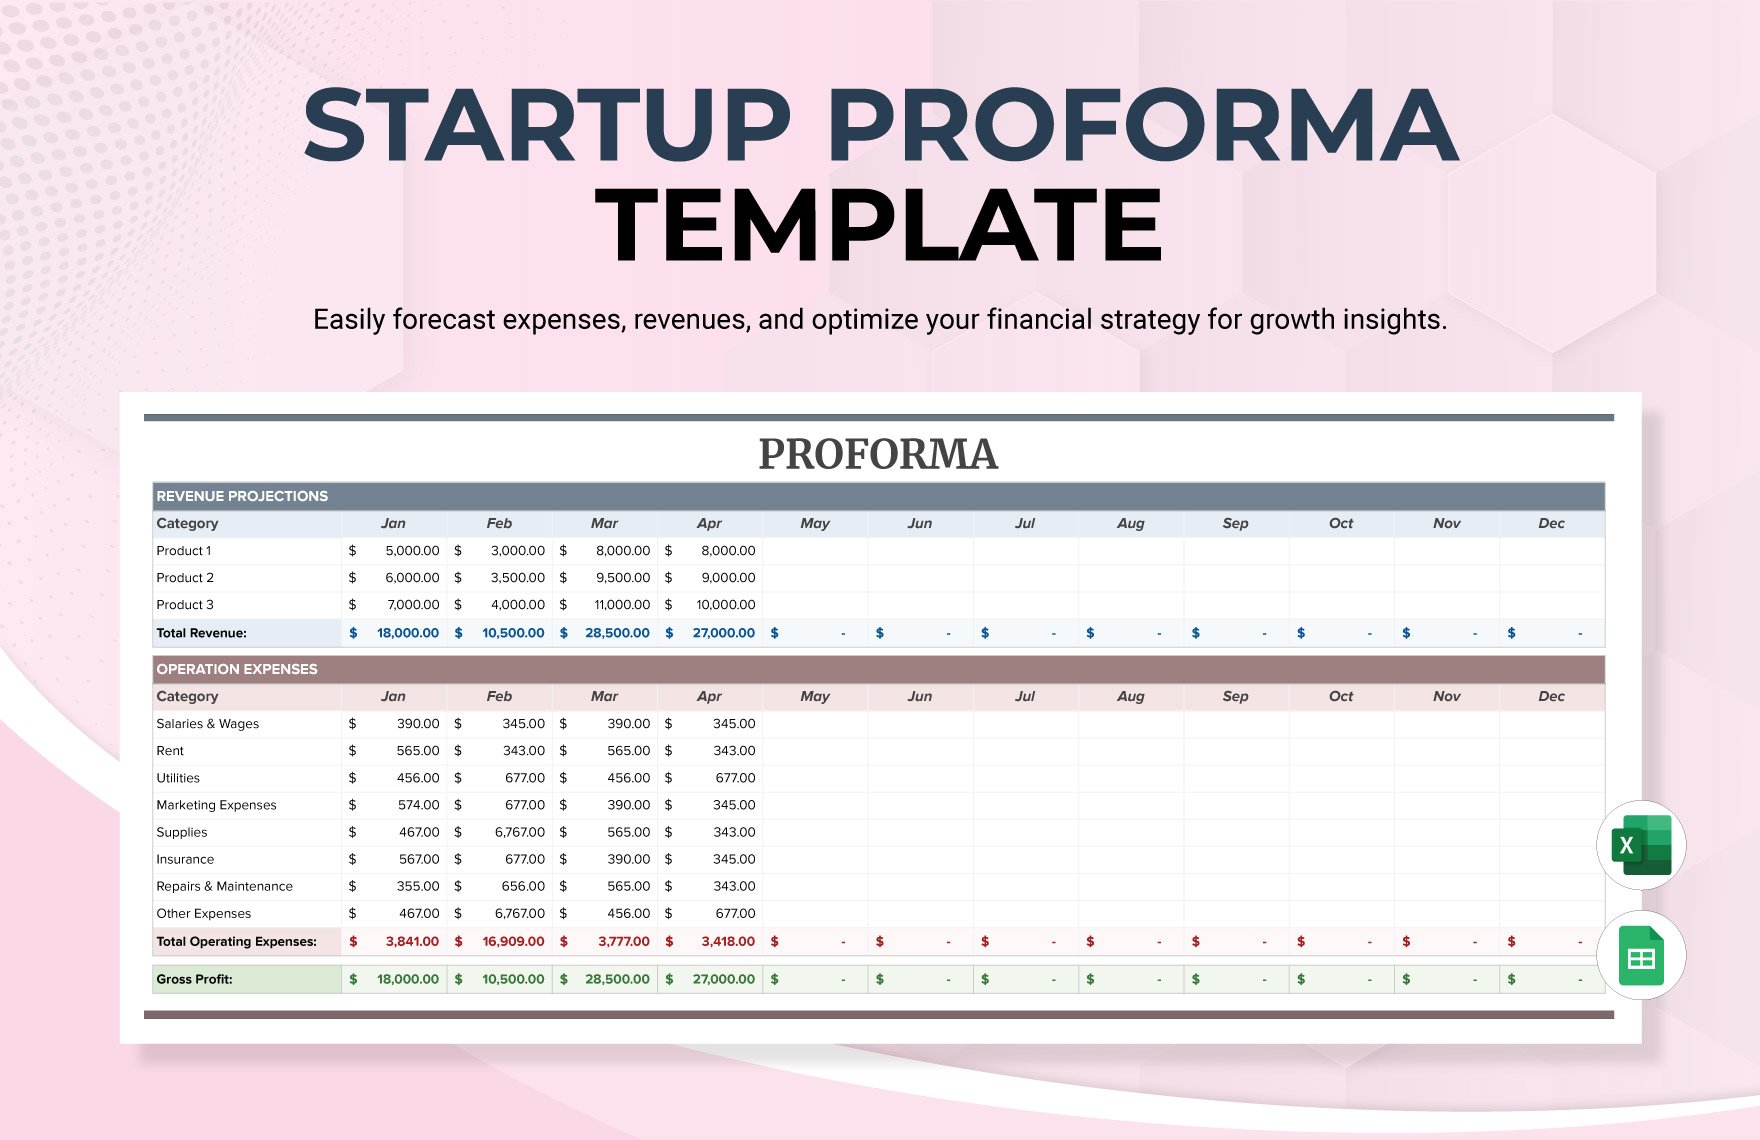 Startup Proforma Template in Excel, Google Sheets